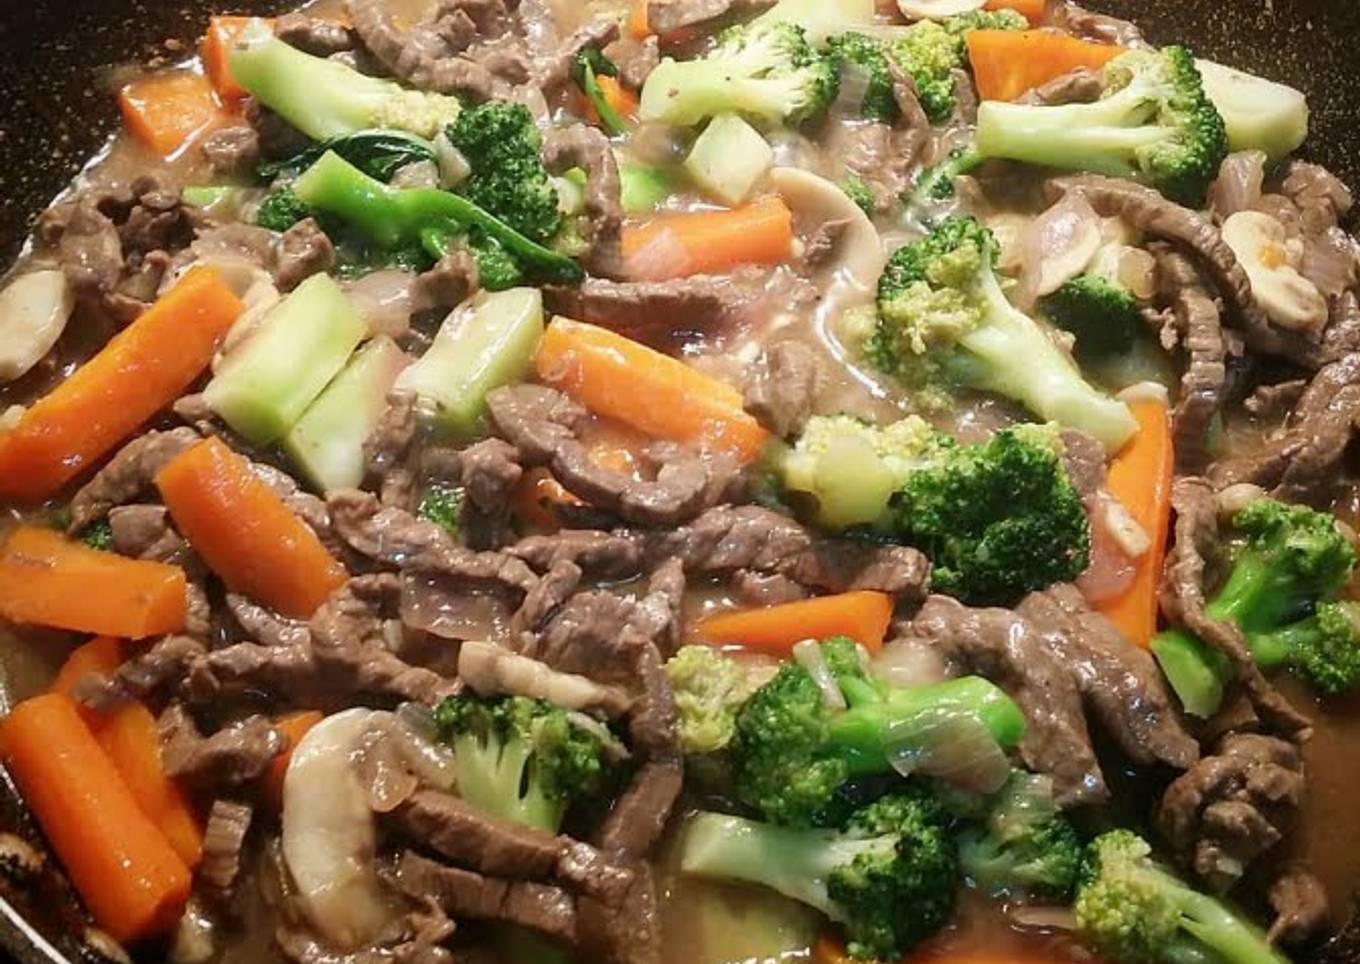 Beef Broccoli with Mushroom in Oyster Sauce.